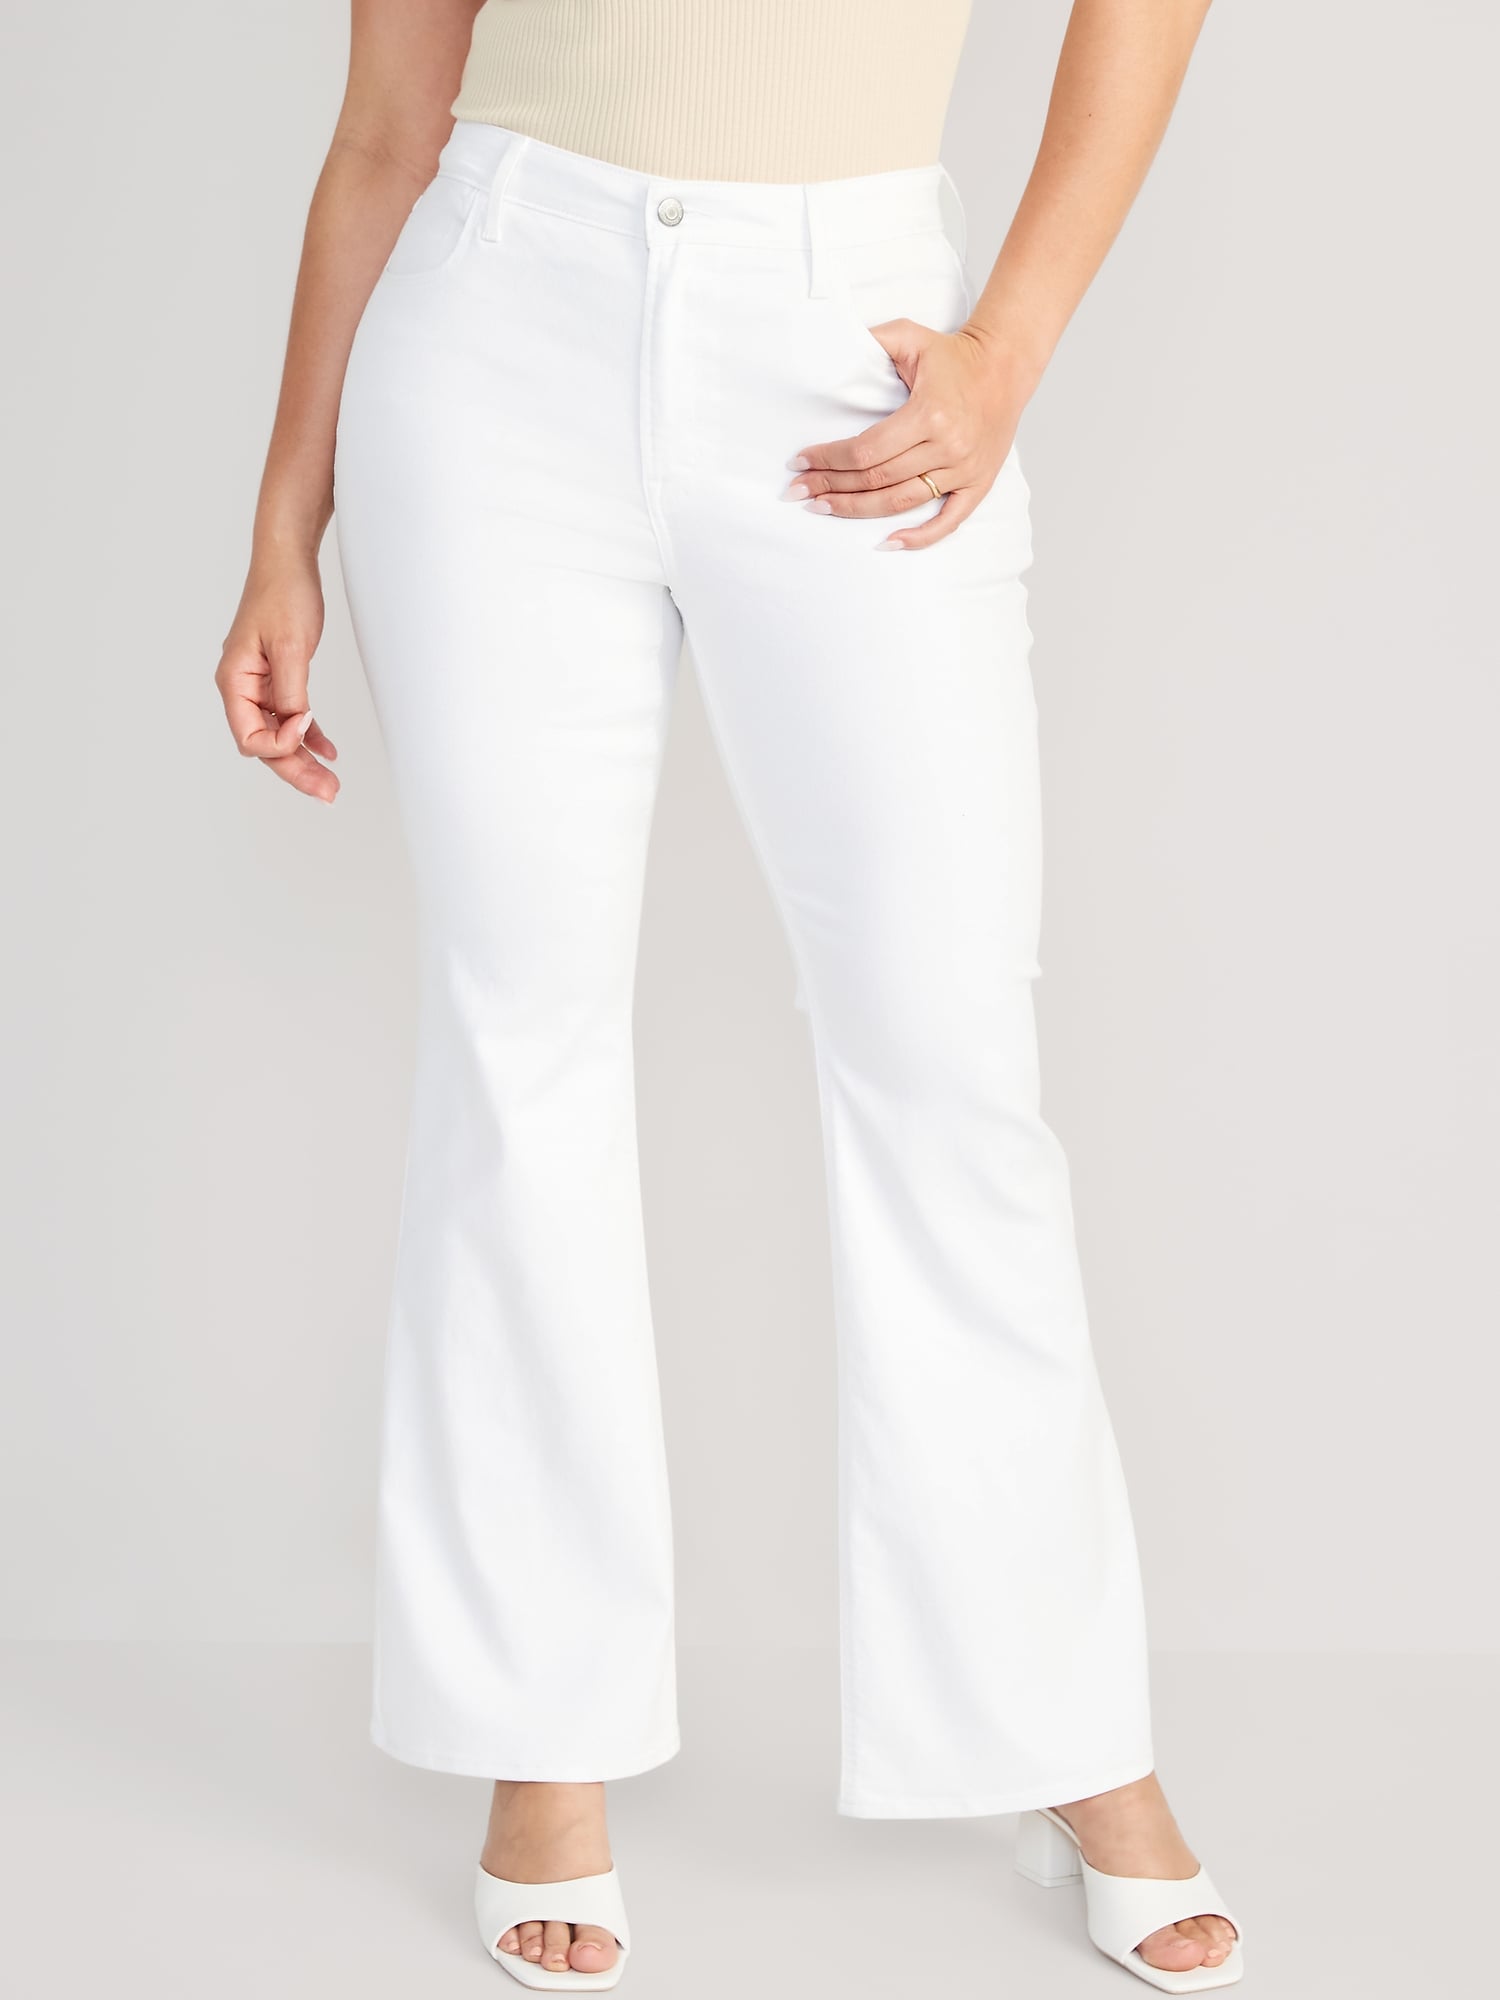 High-Waisted Wow White Flare Jeans | Old Navy